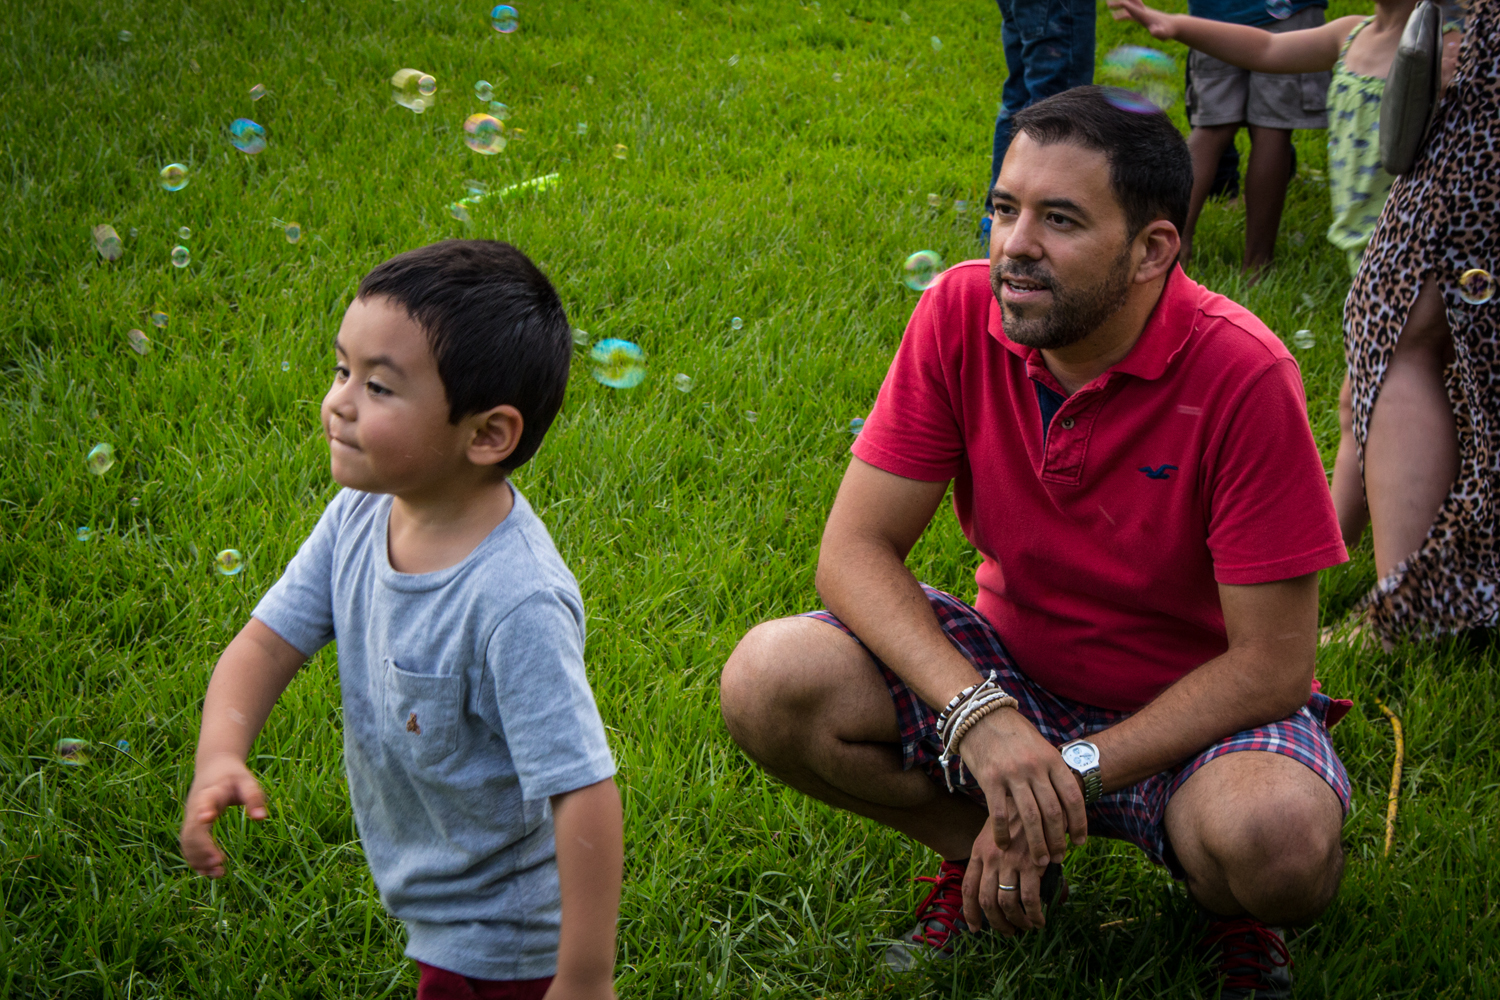 Father_and_Son_Bubbles_2.jpg